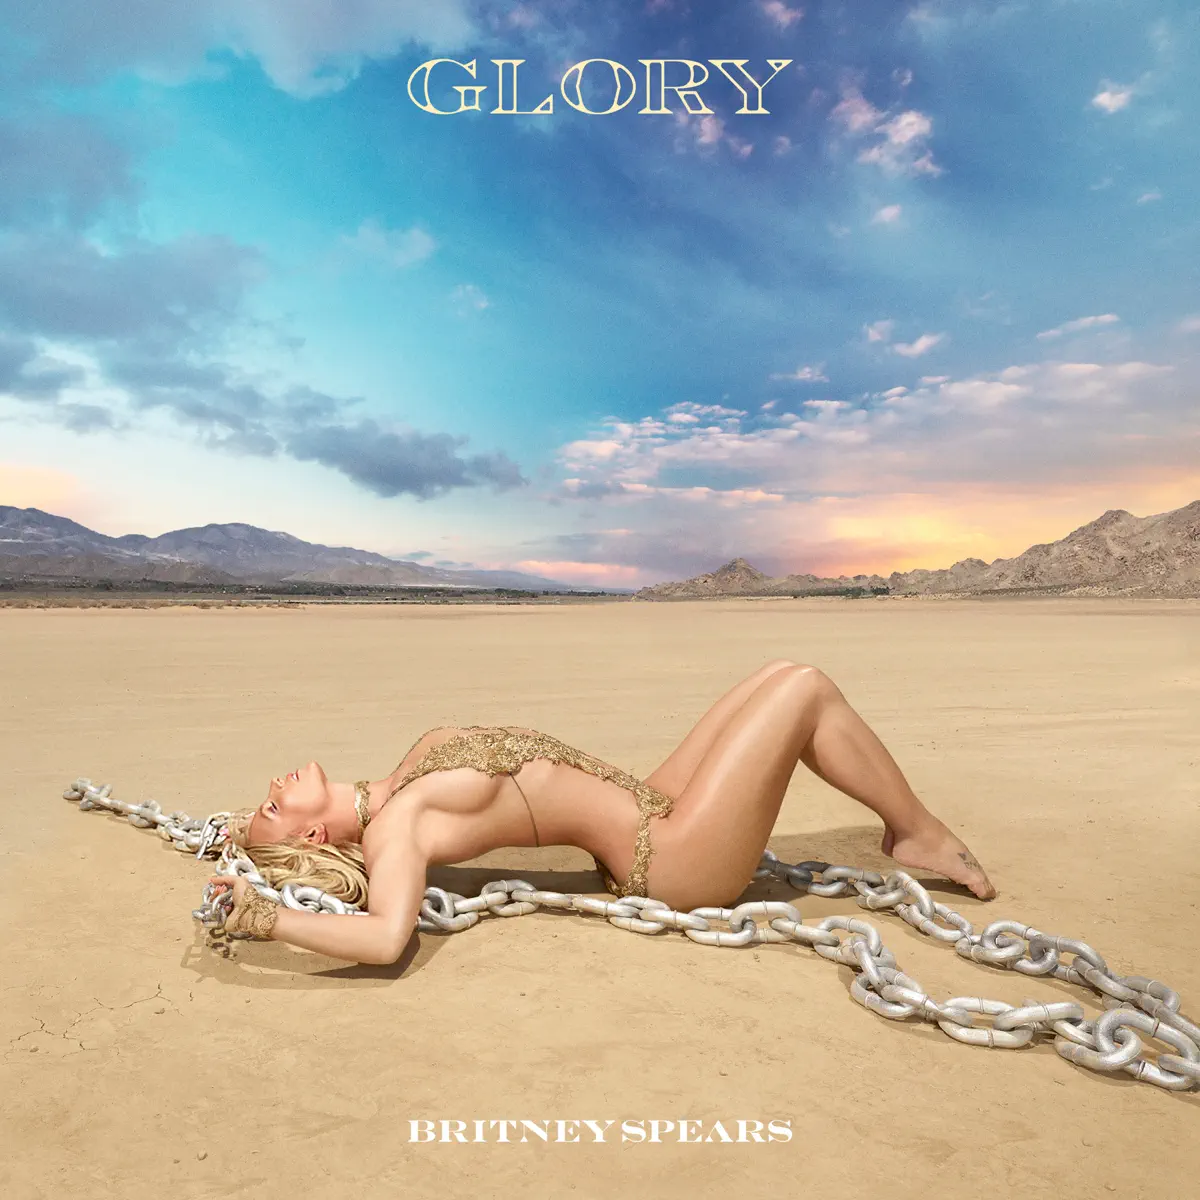 Britney Spears - Glory (Deluxe) [Apple Digital Master] (2020) [iTunes Plus AAC M4A]-新房子